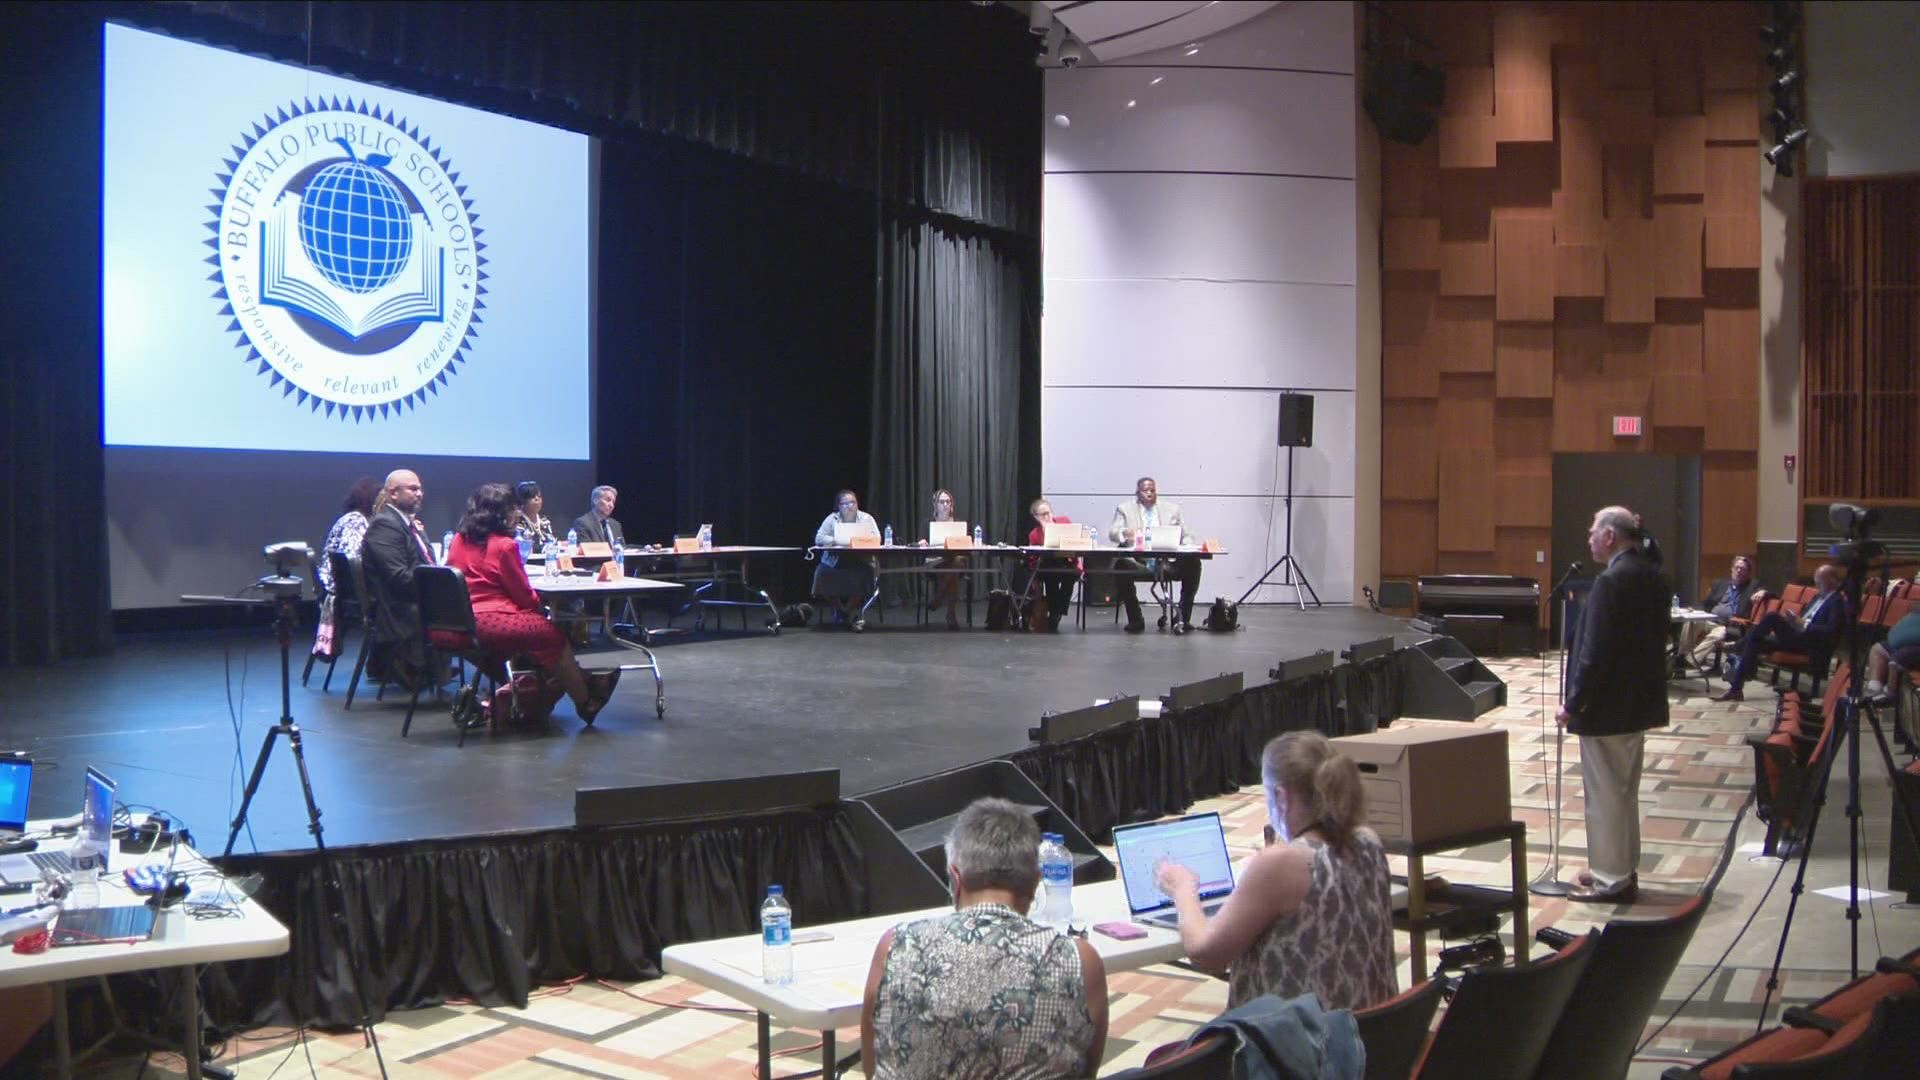 Buffalo Teachers Federation overwhelmingly backed the no confidence vote that ended last night, with more than 90 percent in favor.